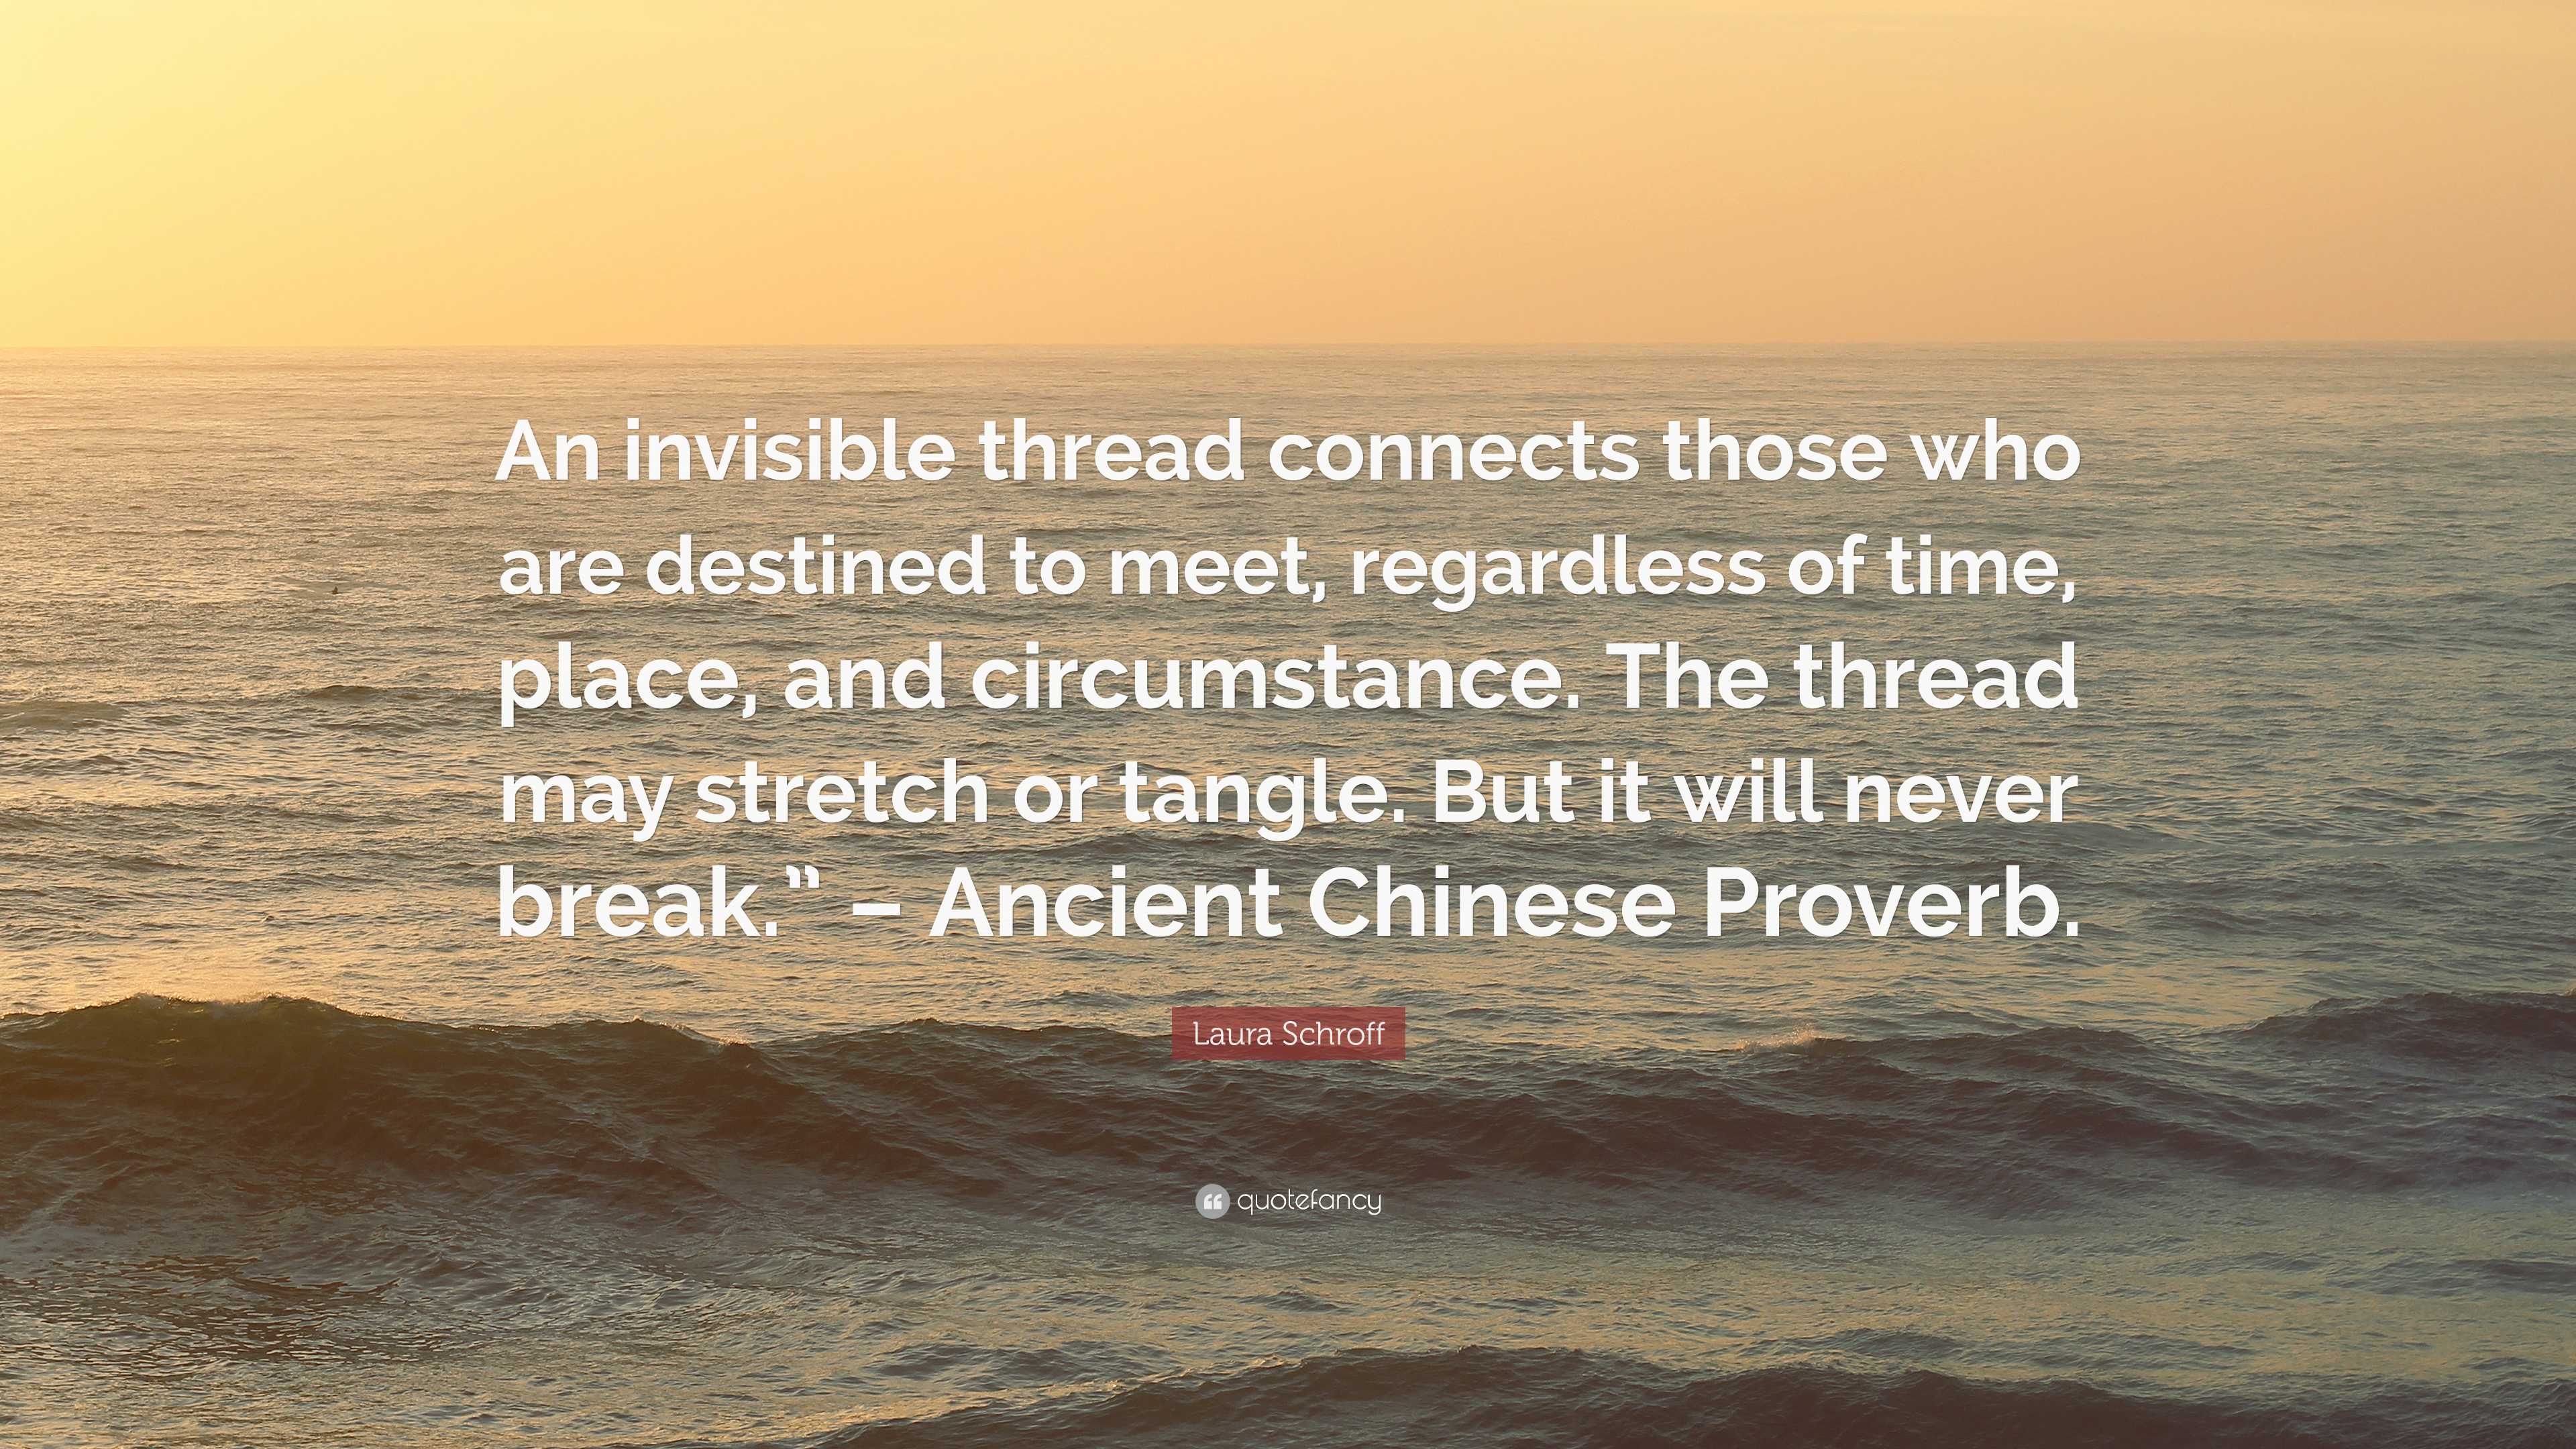 Laura Schroff Quote: “An invisible thread connects those who are